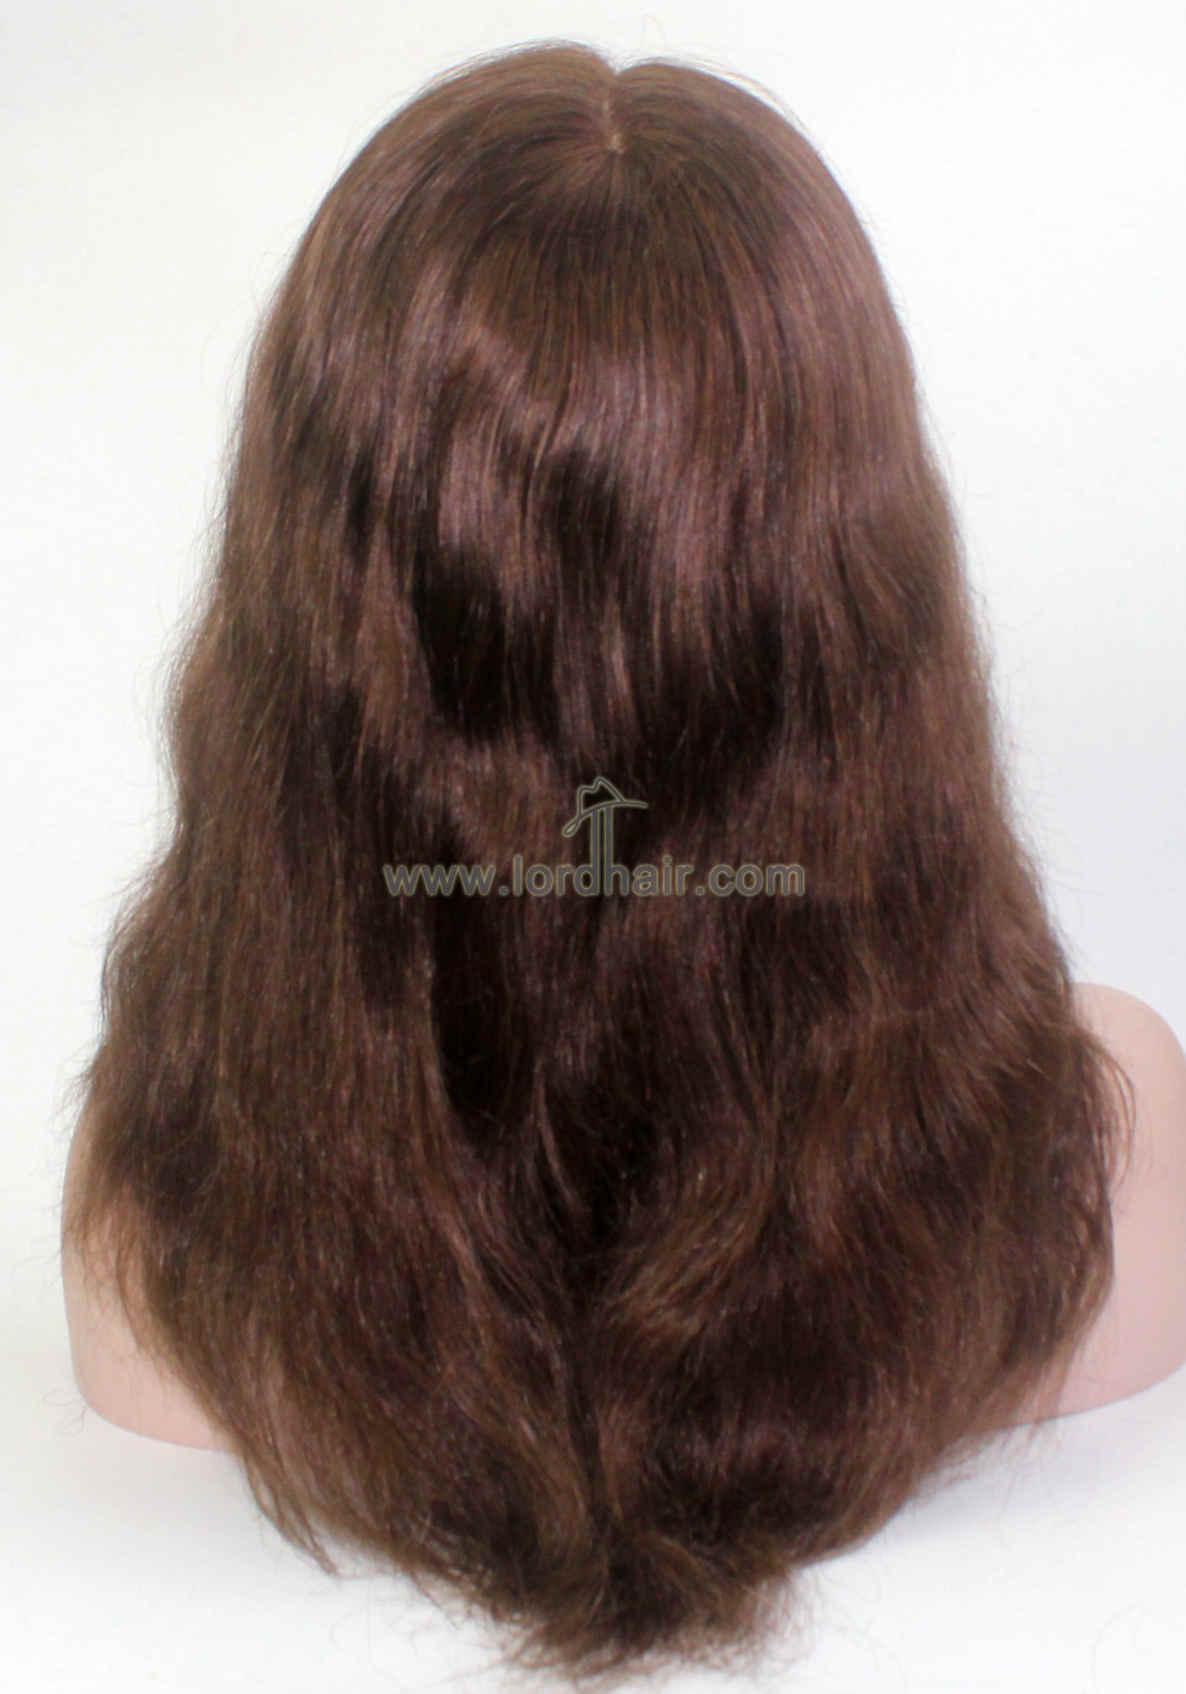 YJ881: Thin Skin Cap Indian Human Hair Lace Front Hair System